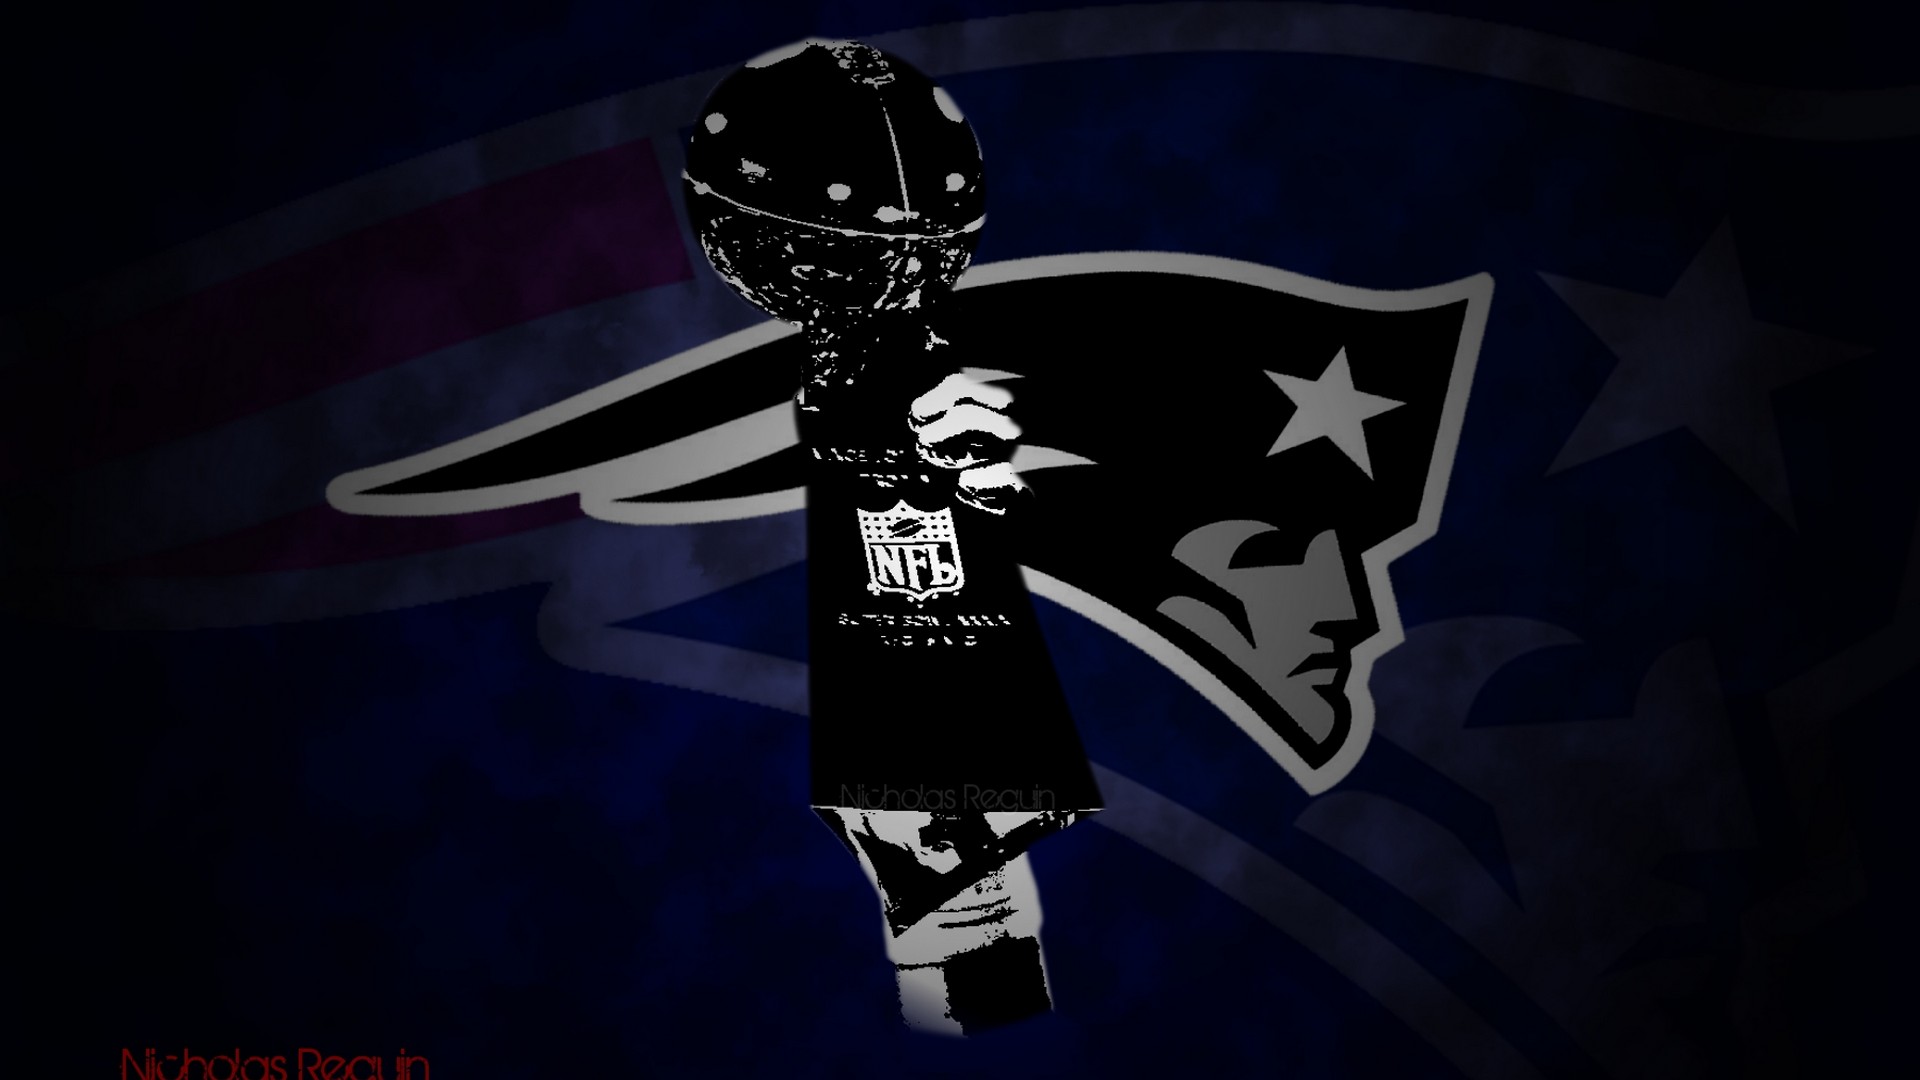 HD Desktop Wallpaper NE Patriots with resolution 1920x1080 pixel. You can make this wallpaper for your Mac or Windows Desktop Background, iPhone, Android or Tablet and another Smartphone device